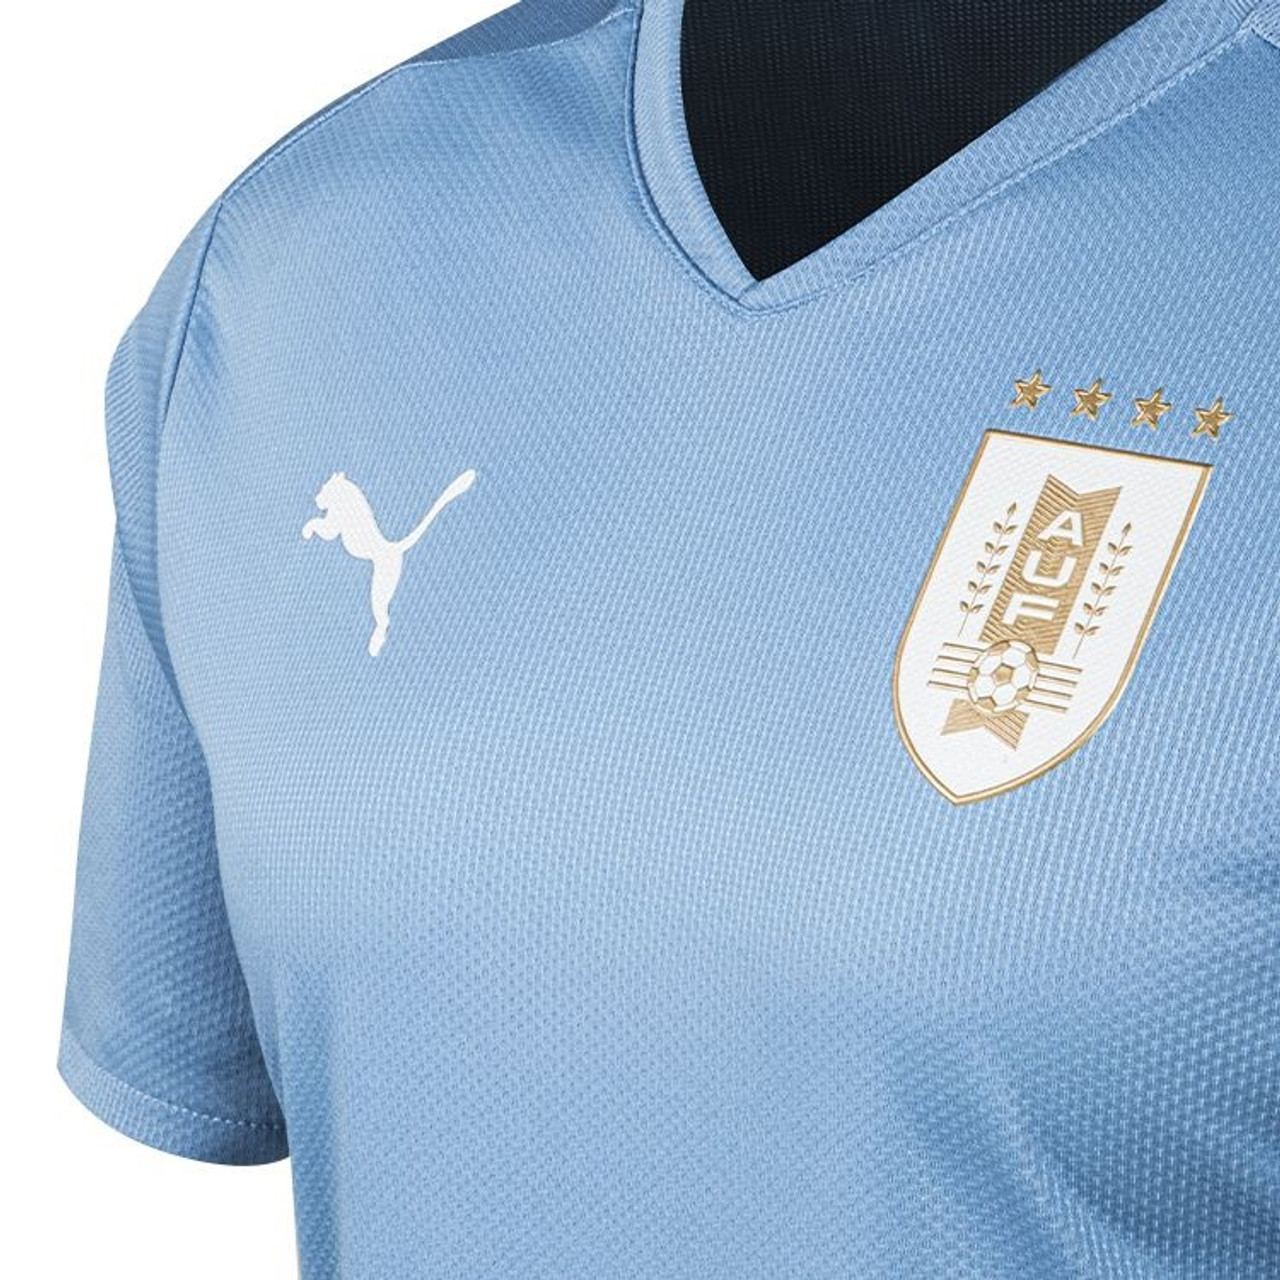 Independiente Puma Camiseta Titular Men's T-Shirt Card Holder (Various  Sizes Available) - Pampa Direct